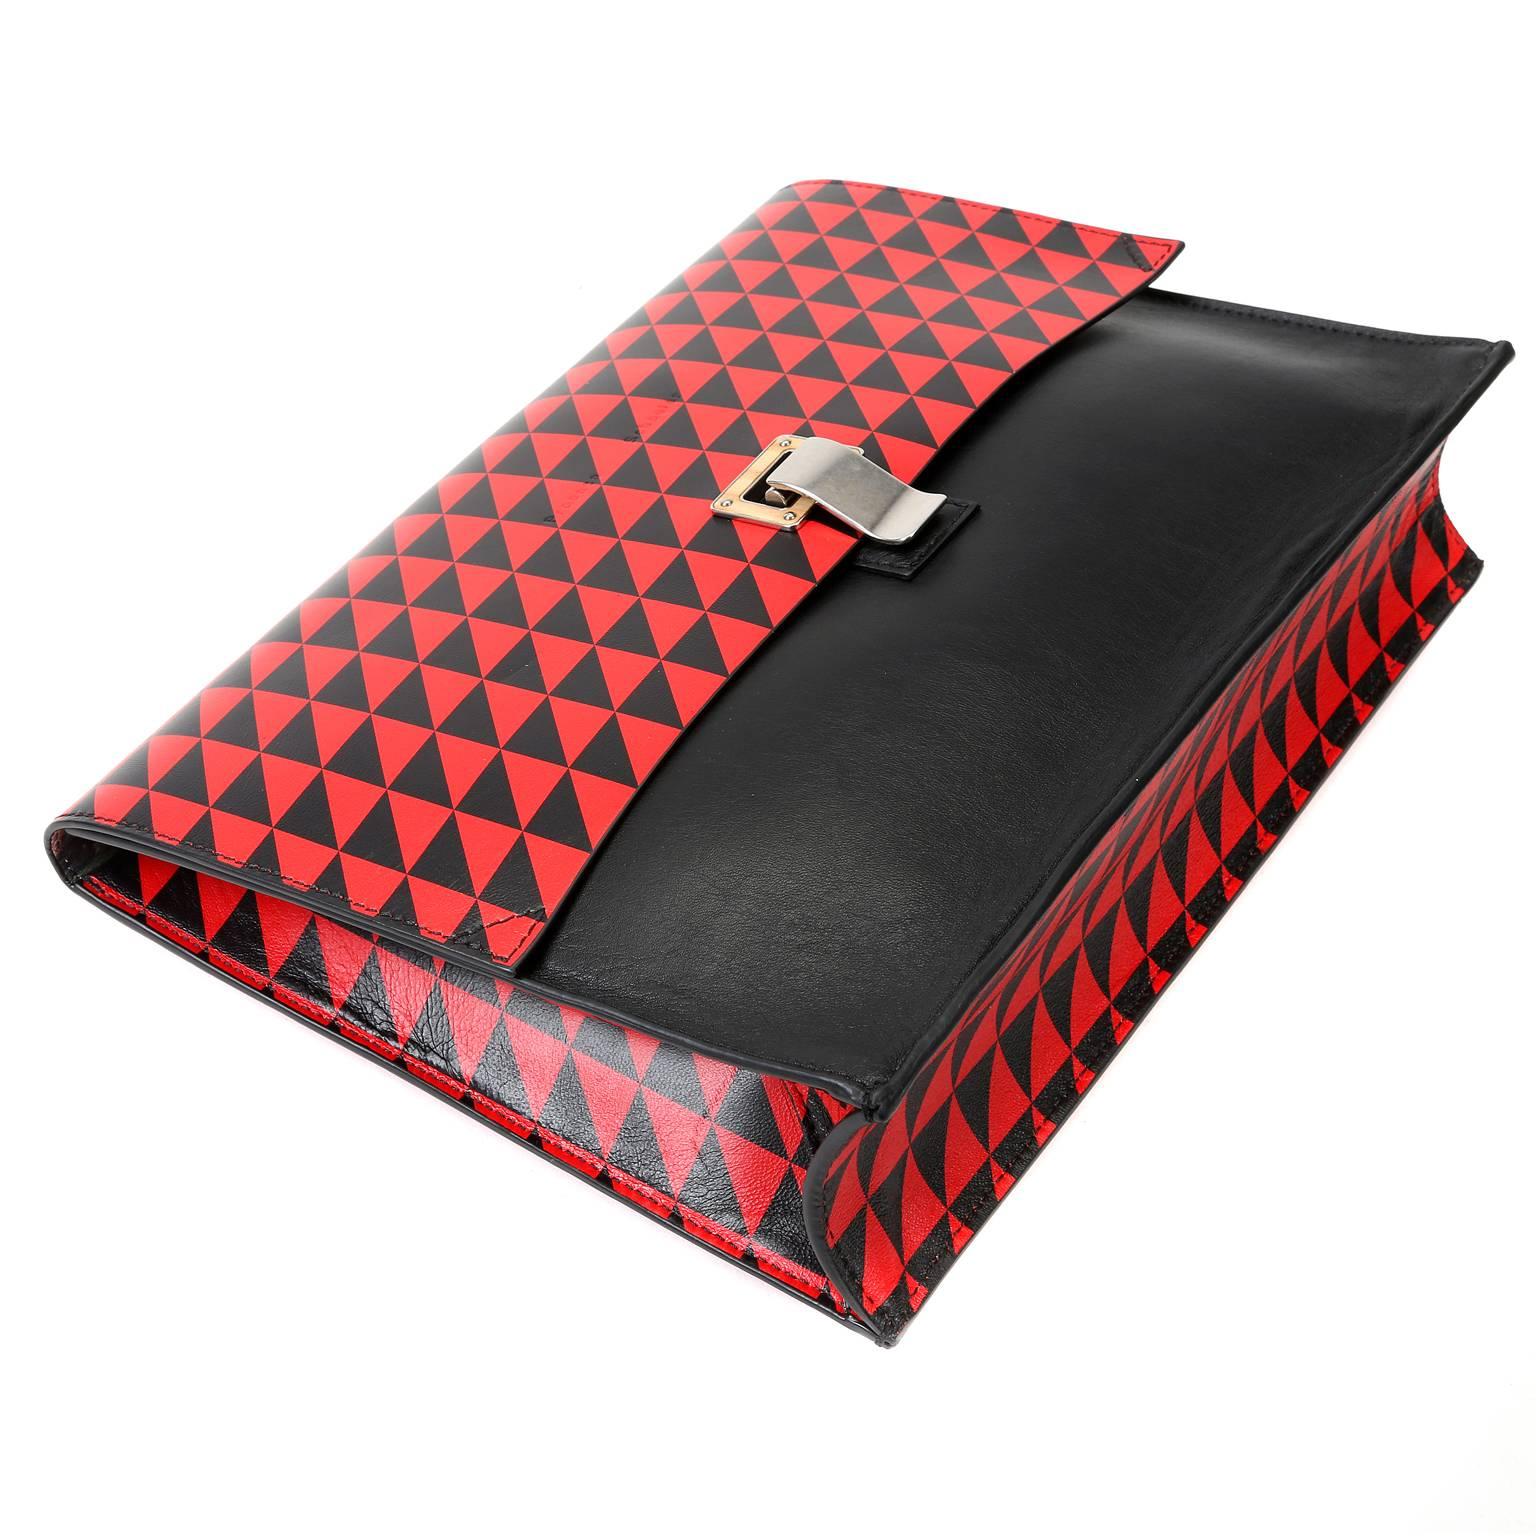 Proenza Schouler Red and Black Leather Lunch Bag Clutch 1